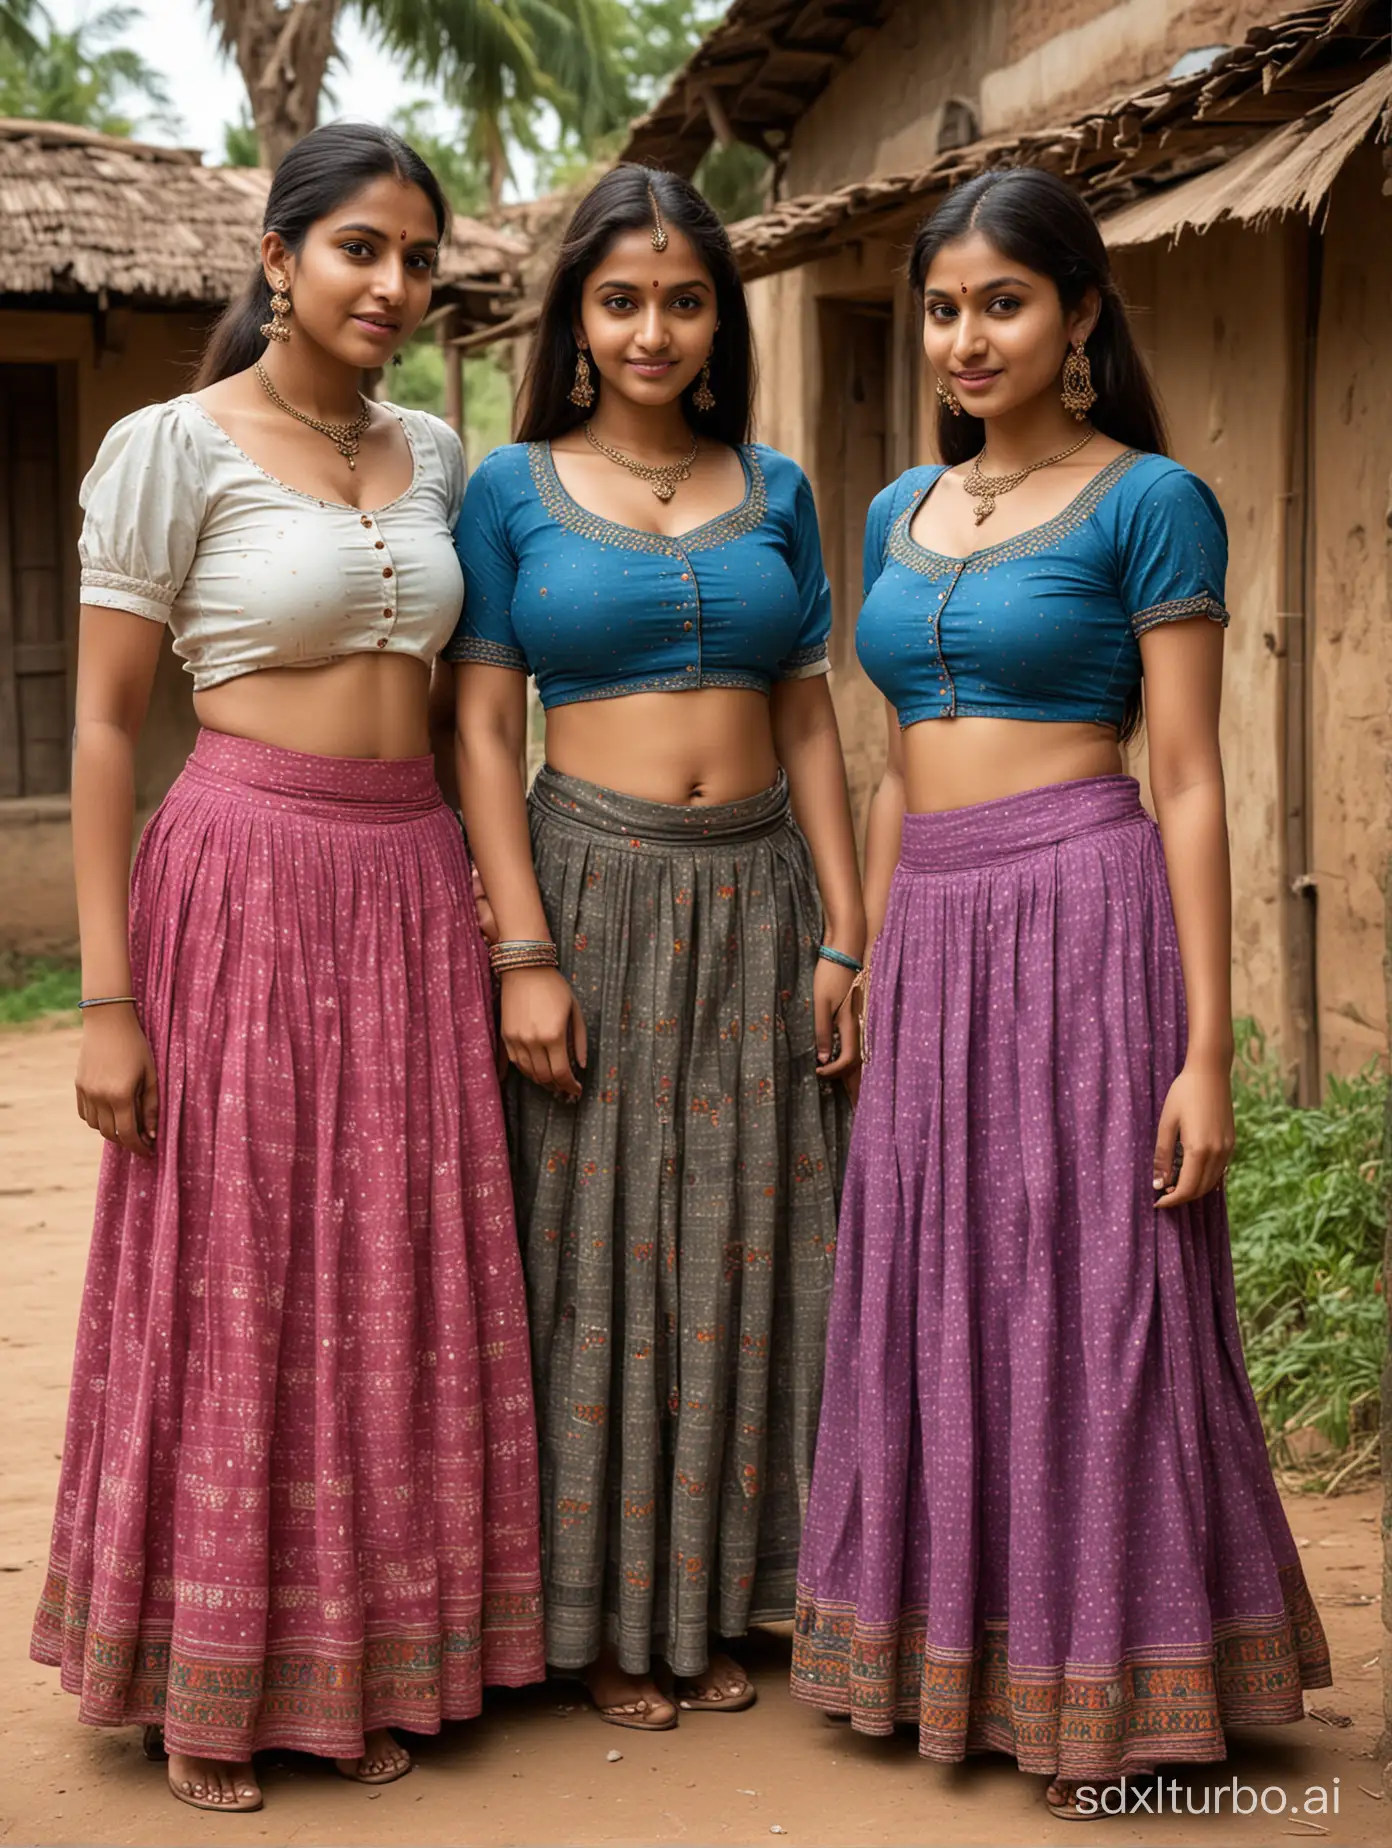 Indian-Village-Girls-in-Rustic-Attire-Authentic-Portrait-of-Three-Busty-Beauties